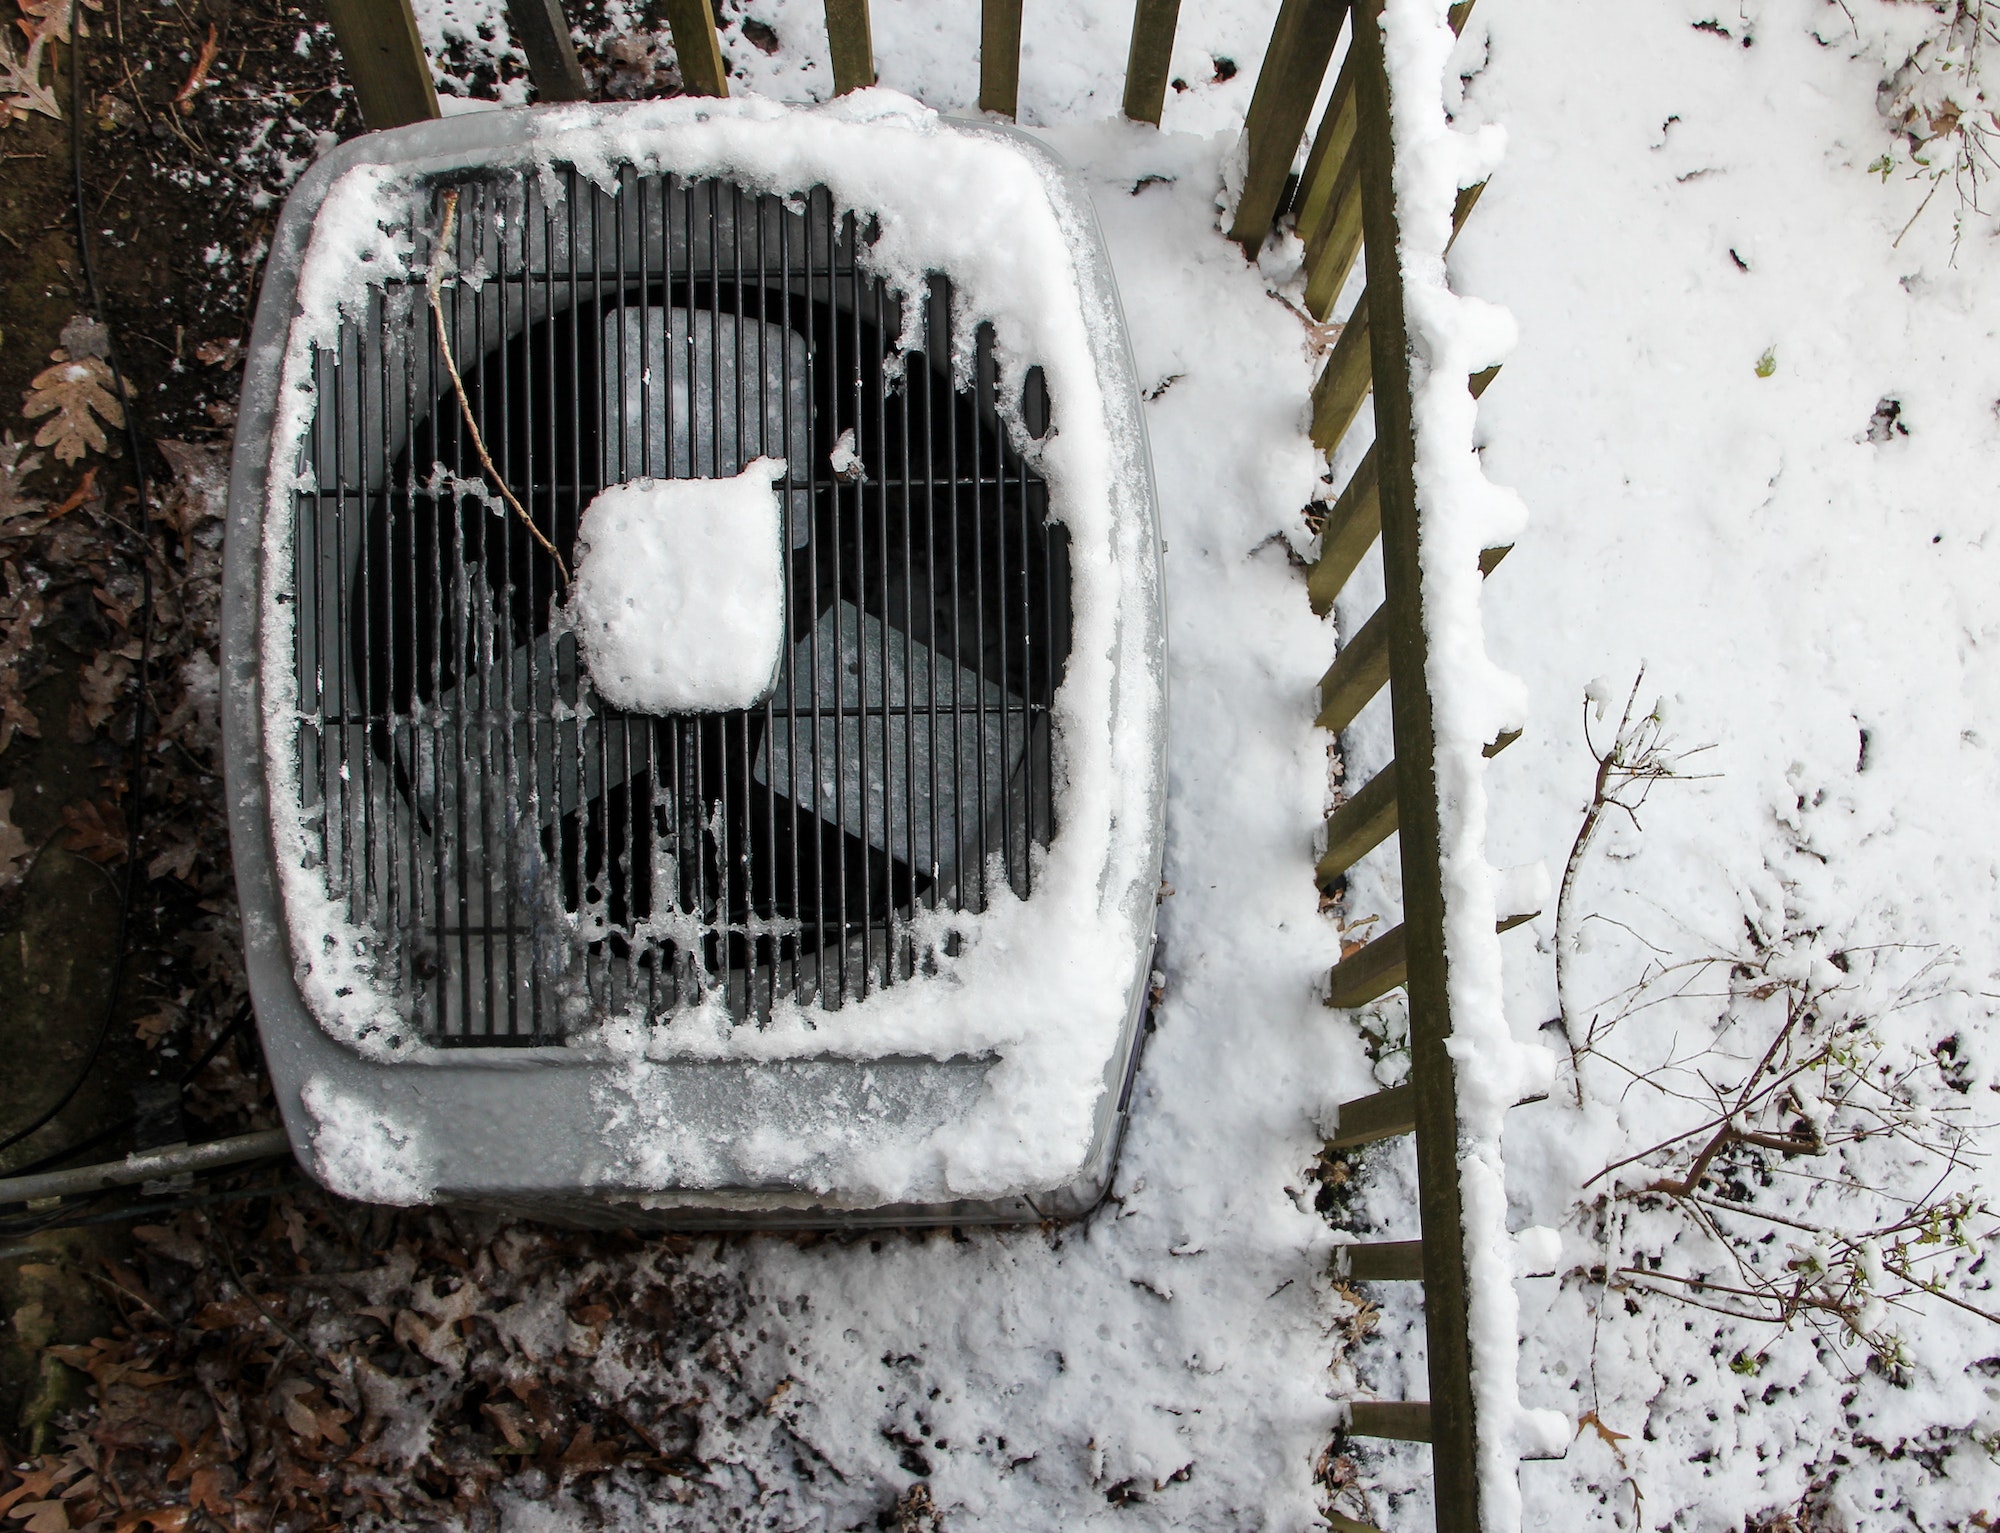 Overhead view of Central Air Conditioner HVAC unit covered with snow after snowstorm